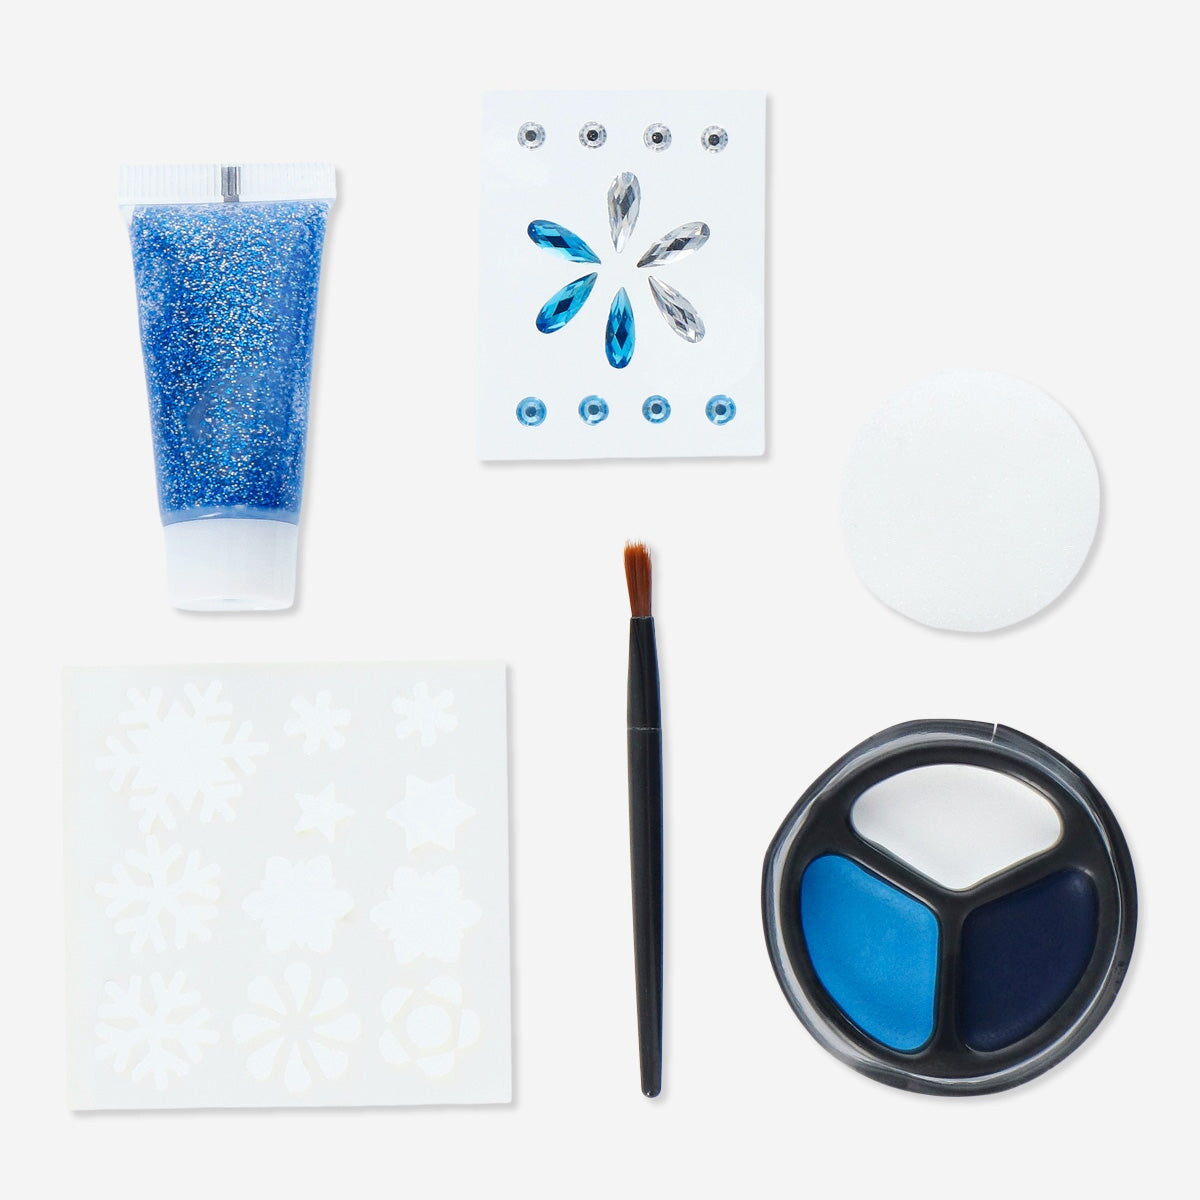 Snow queen make-up kit Personal care Flying Tiger Copenhagen 